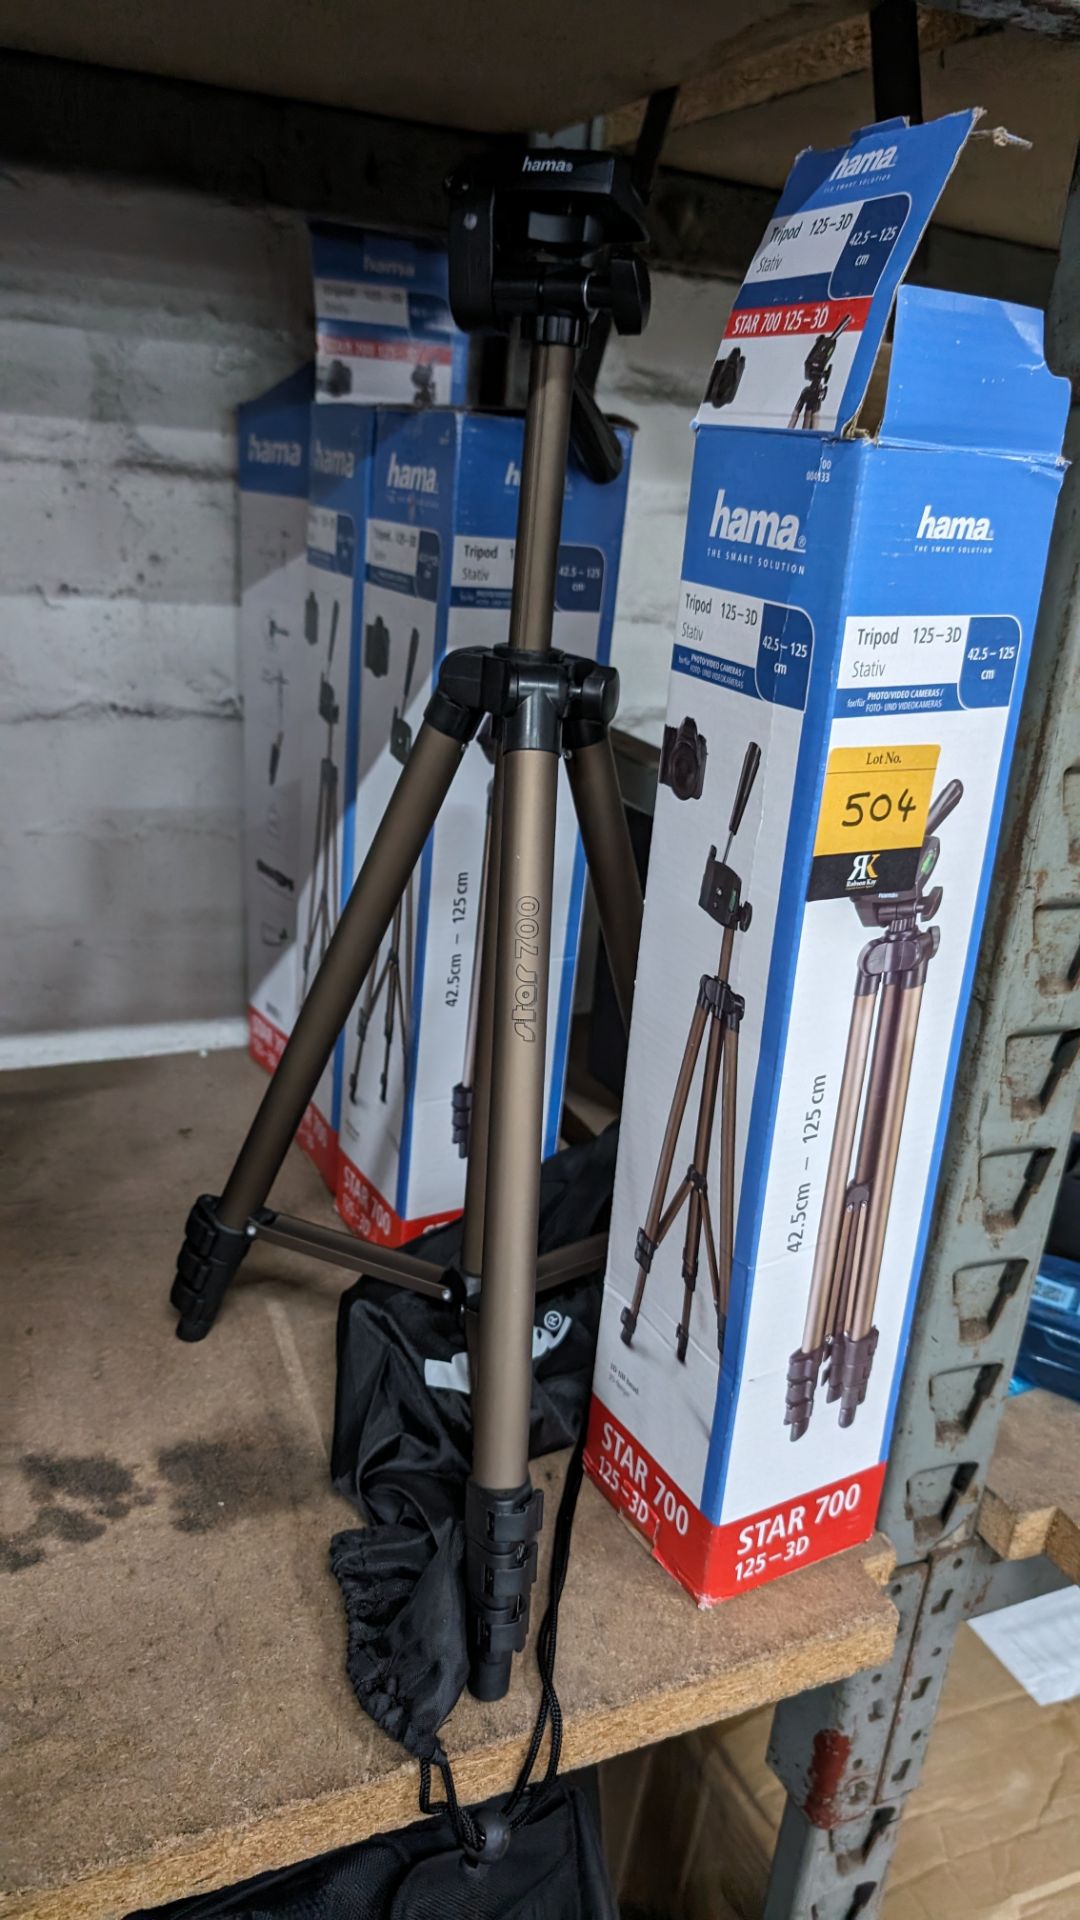 4 off Hama Star 700 tripods, 125-3D, 42.5-125cm - Image 2 of 6